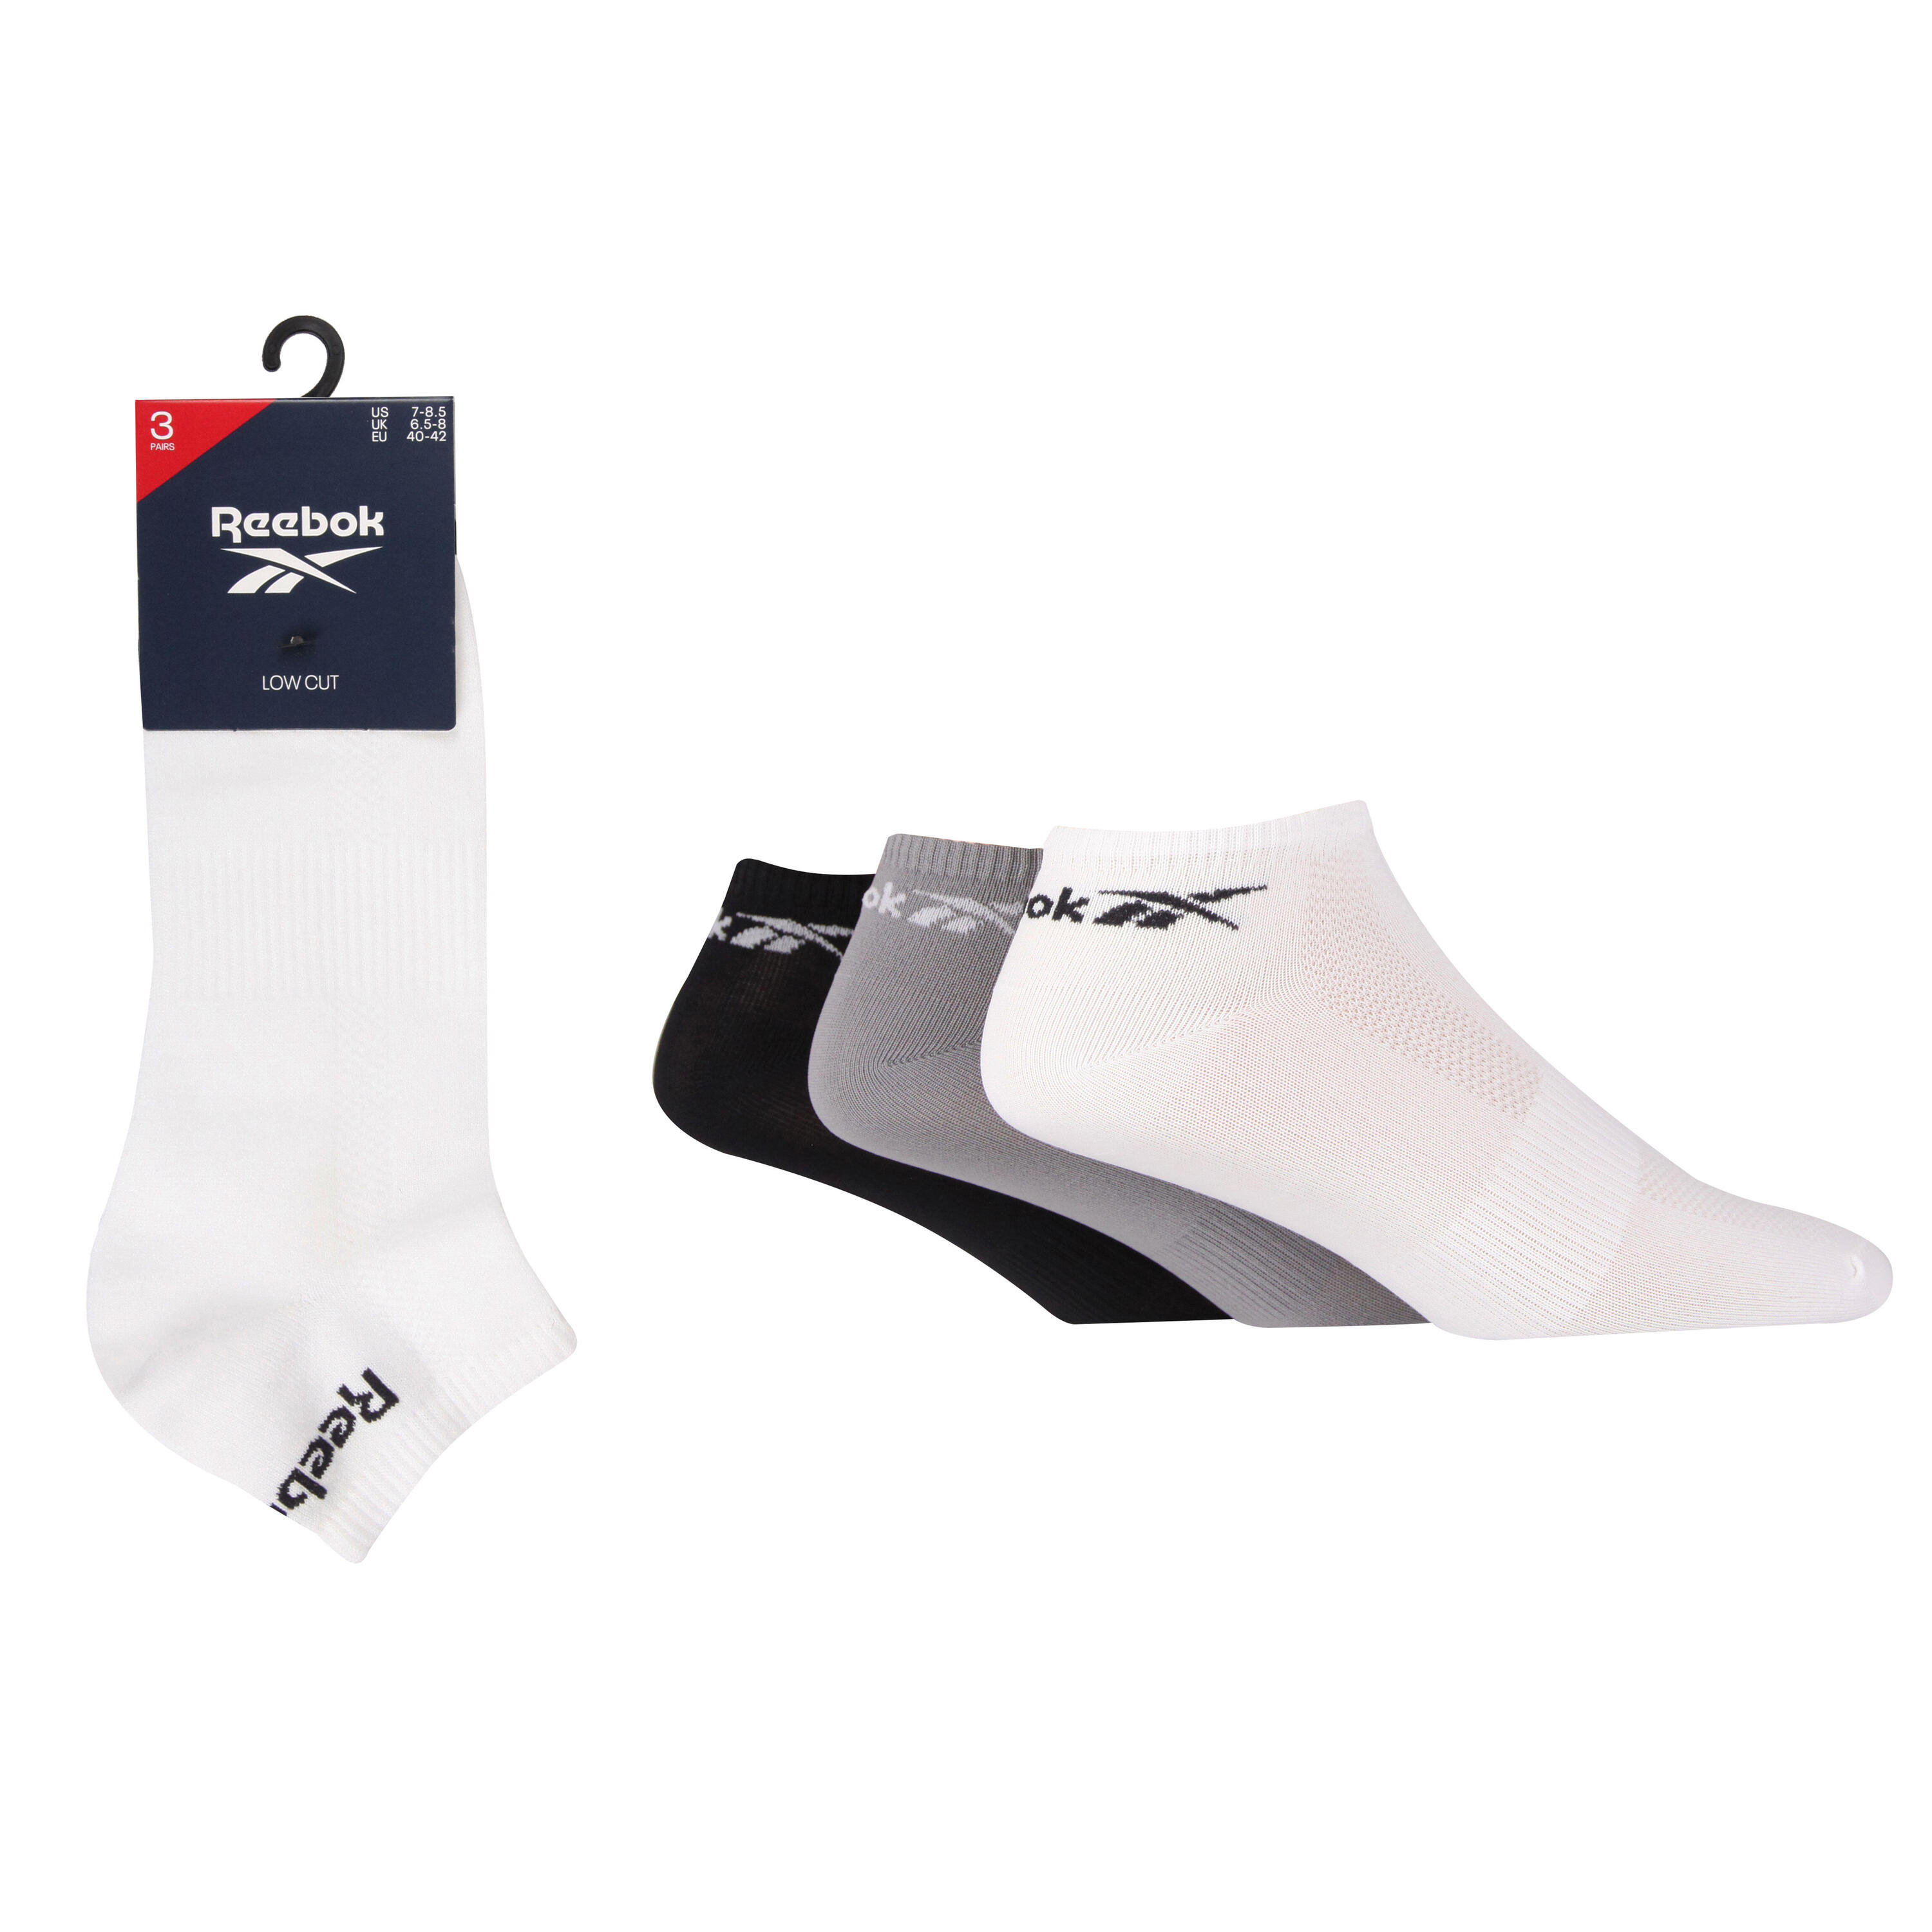 REEBOK 3 Pair Pack Low Cut Trainer Sports Socks With Arch Support And Seamless Toes